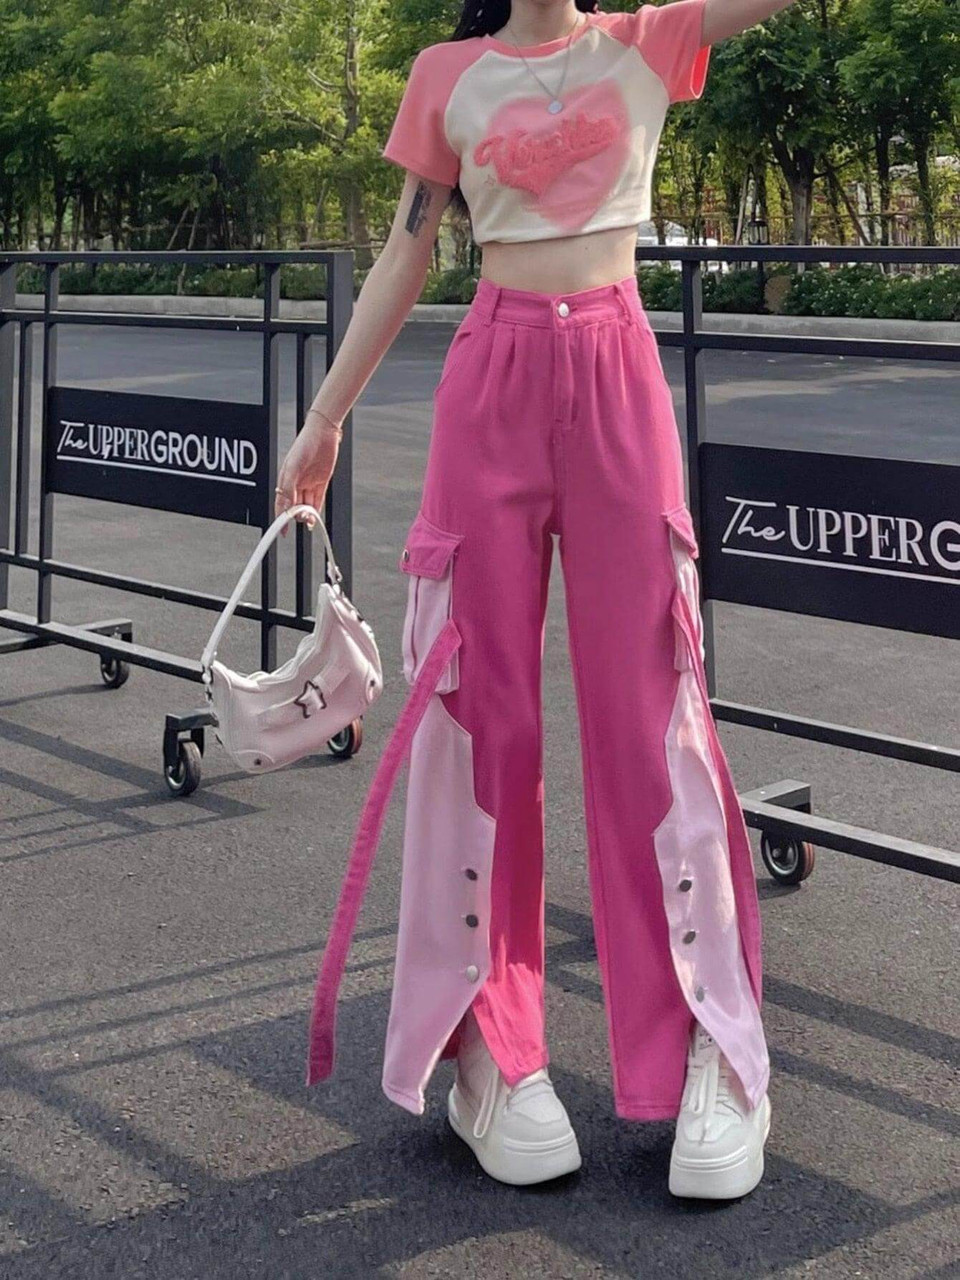 Replying to @btxthinker Hi Barbie👋🏼 Pink cargo pants outfit